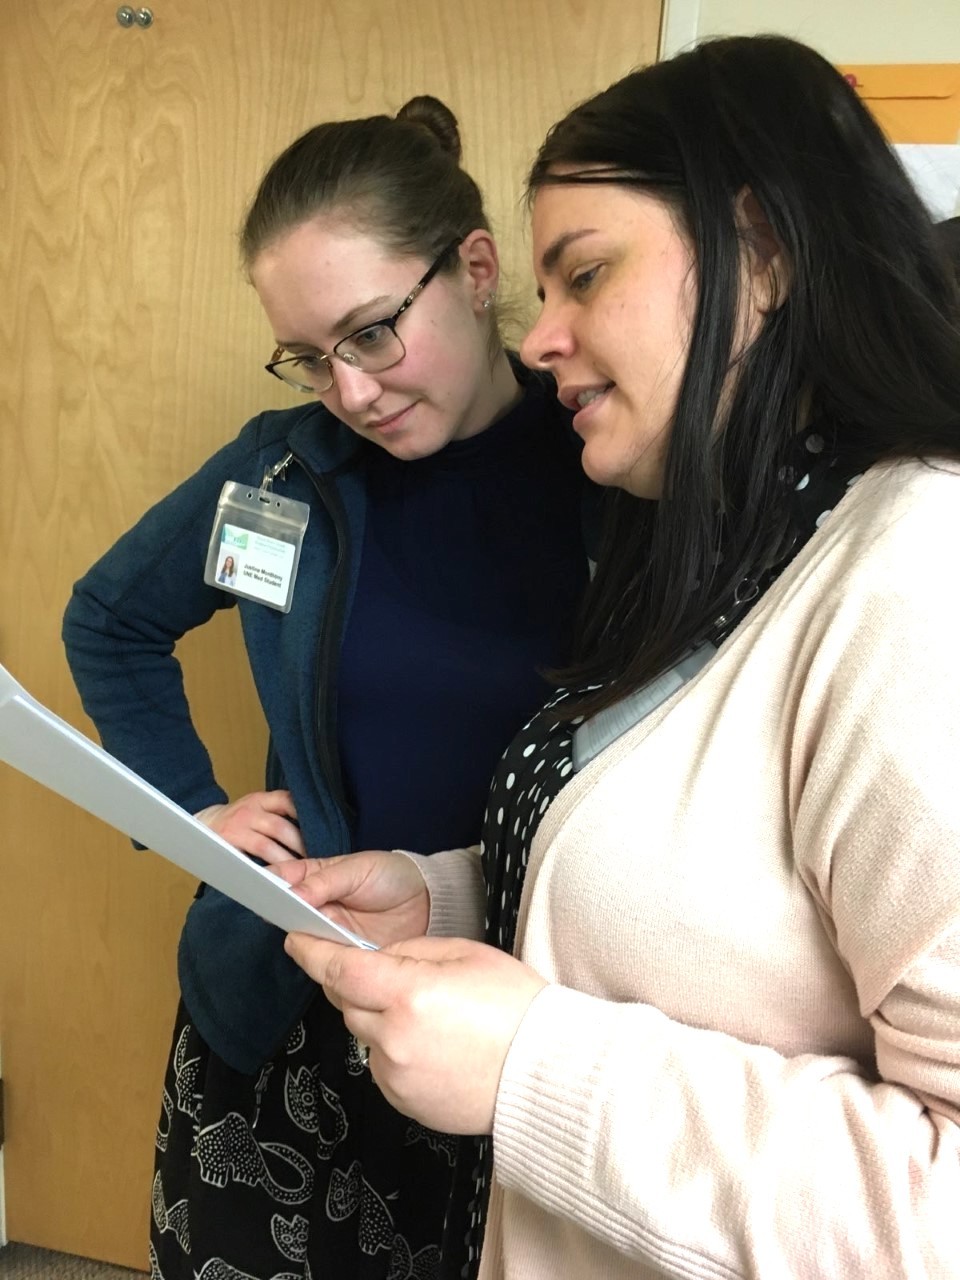 Justine Monthony reviews a chart with her preceptor Rebekah Villarreal, M.D. at an outpatient clinic of MDI Hospital 